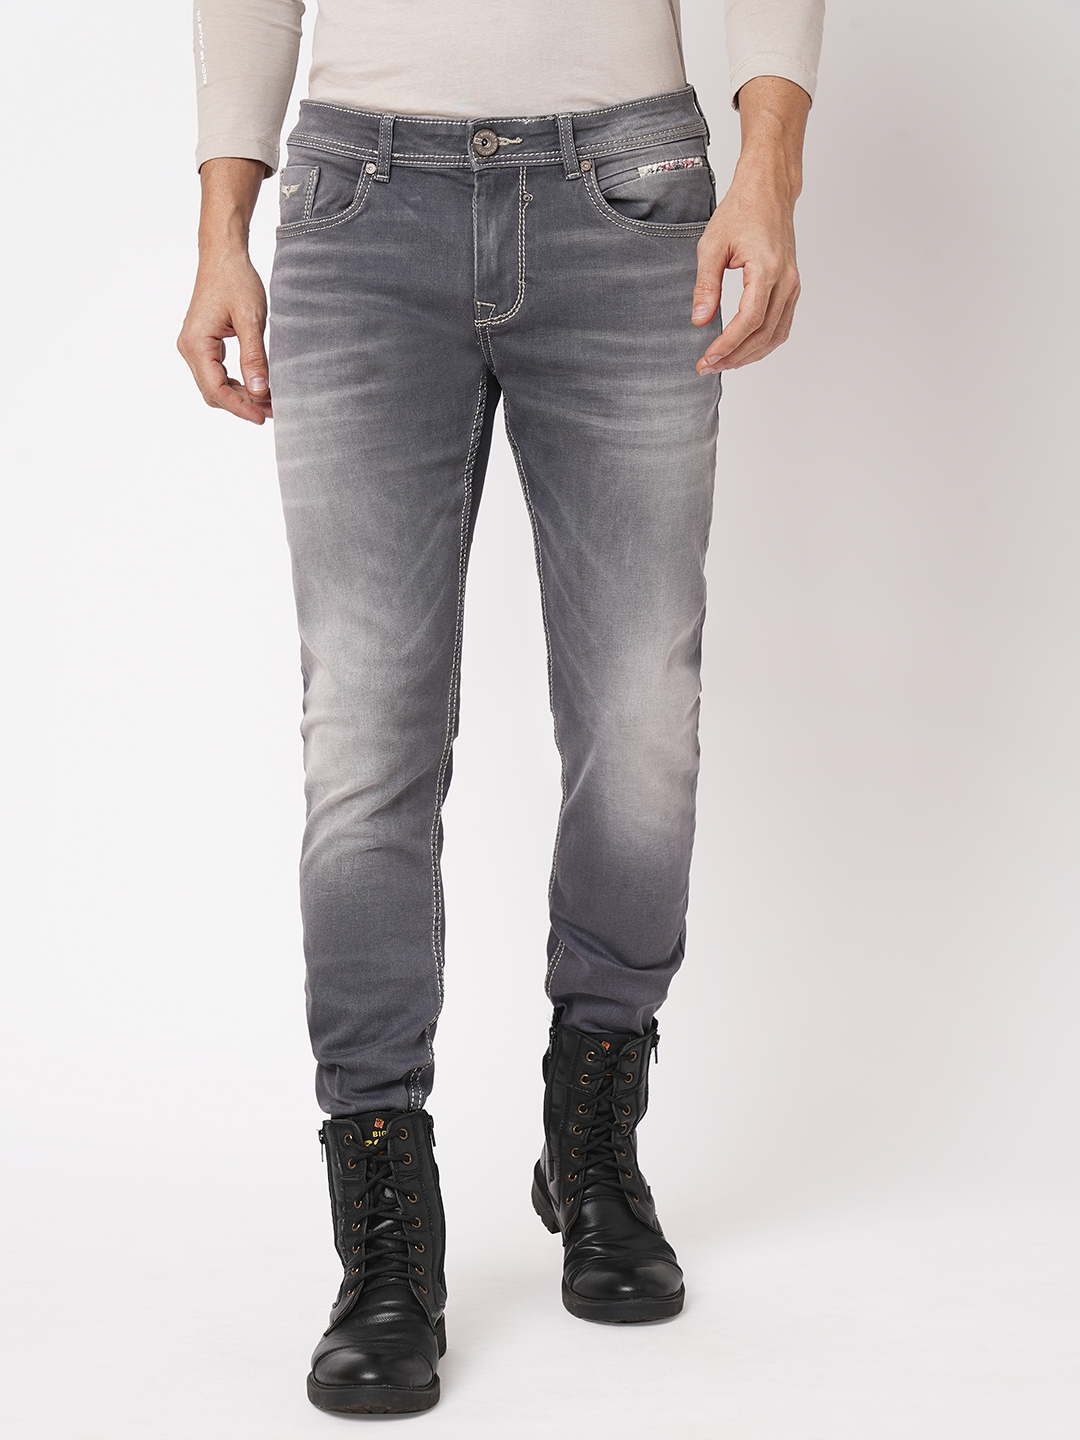 GREY 5 POCKET MID-RISE NARROW TAPERED FIT JEANS (BILLY FIT)